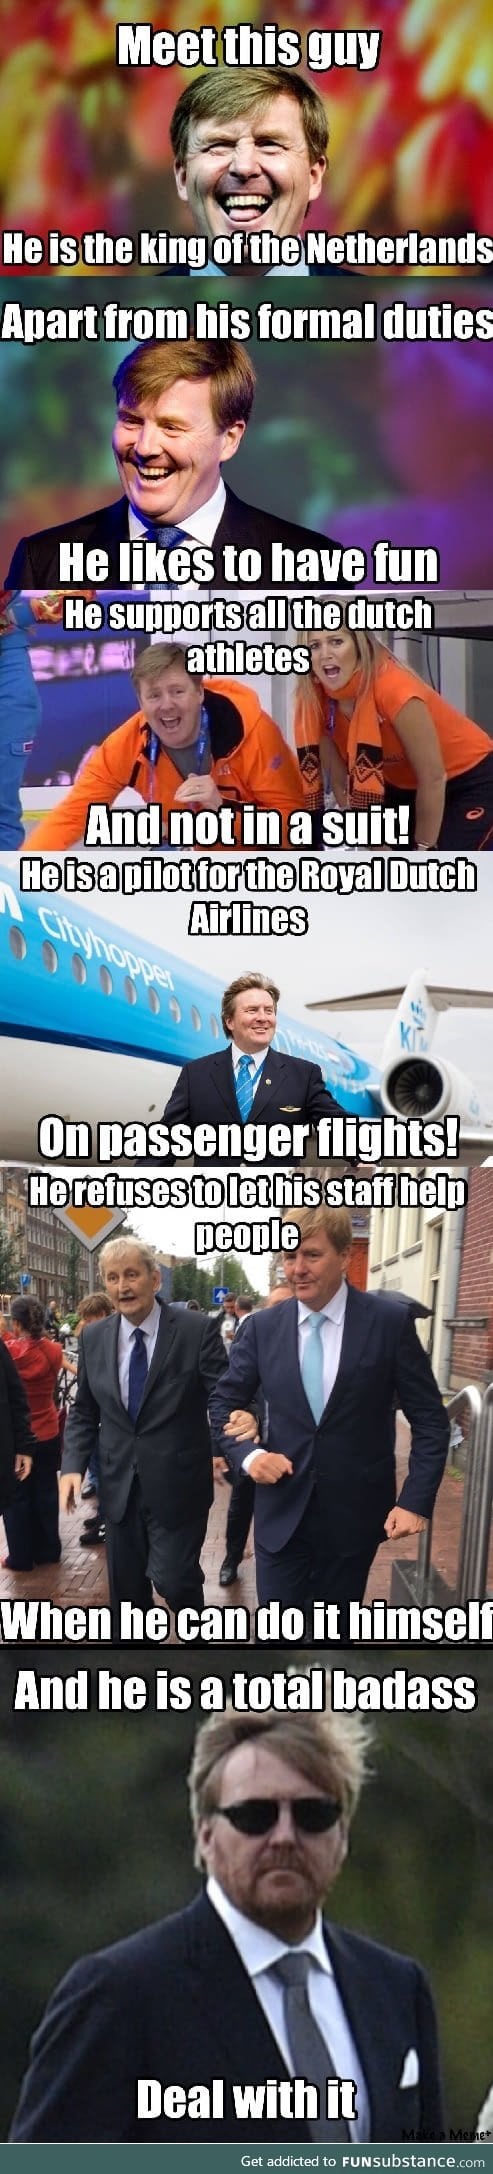 His name is King Willem-Alexander van Oranje-Nassau. But they call him Willy